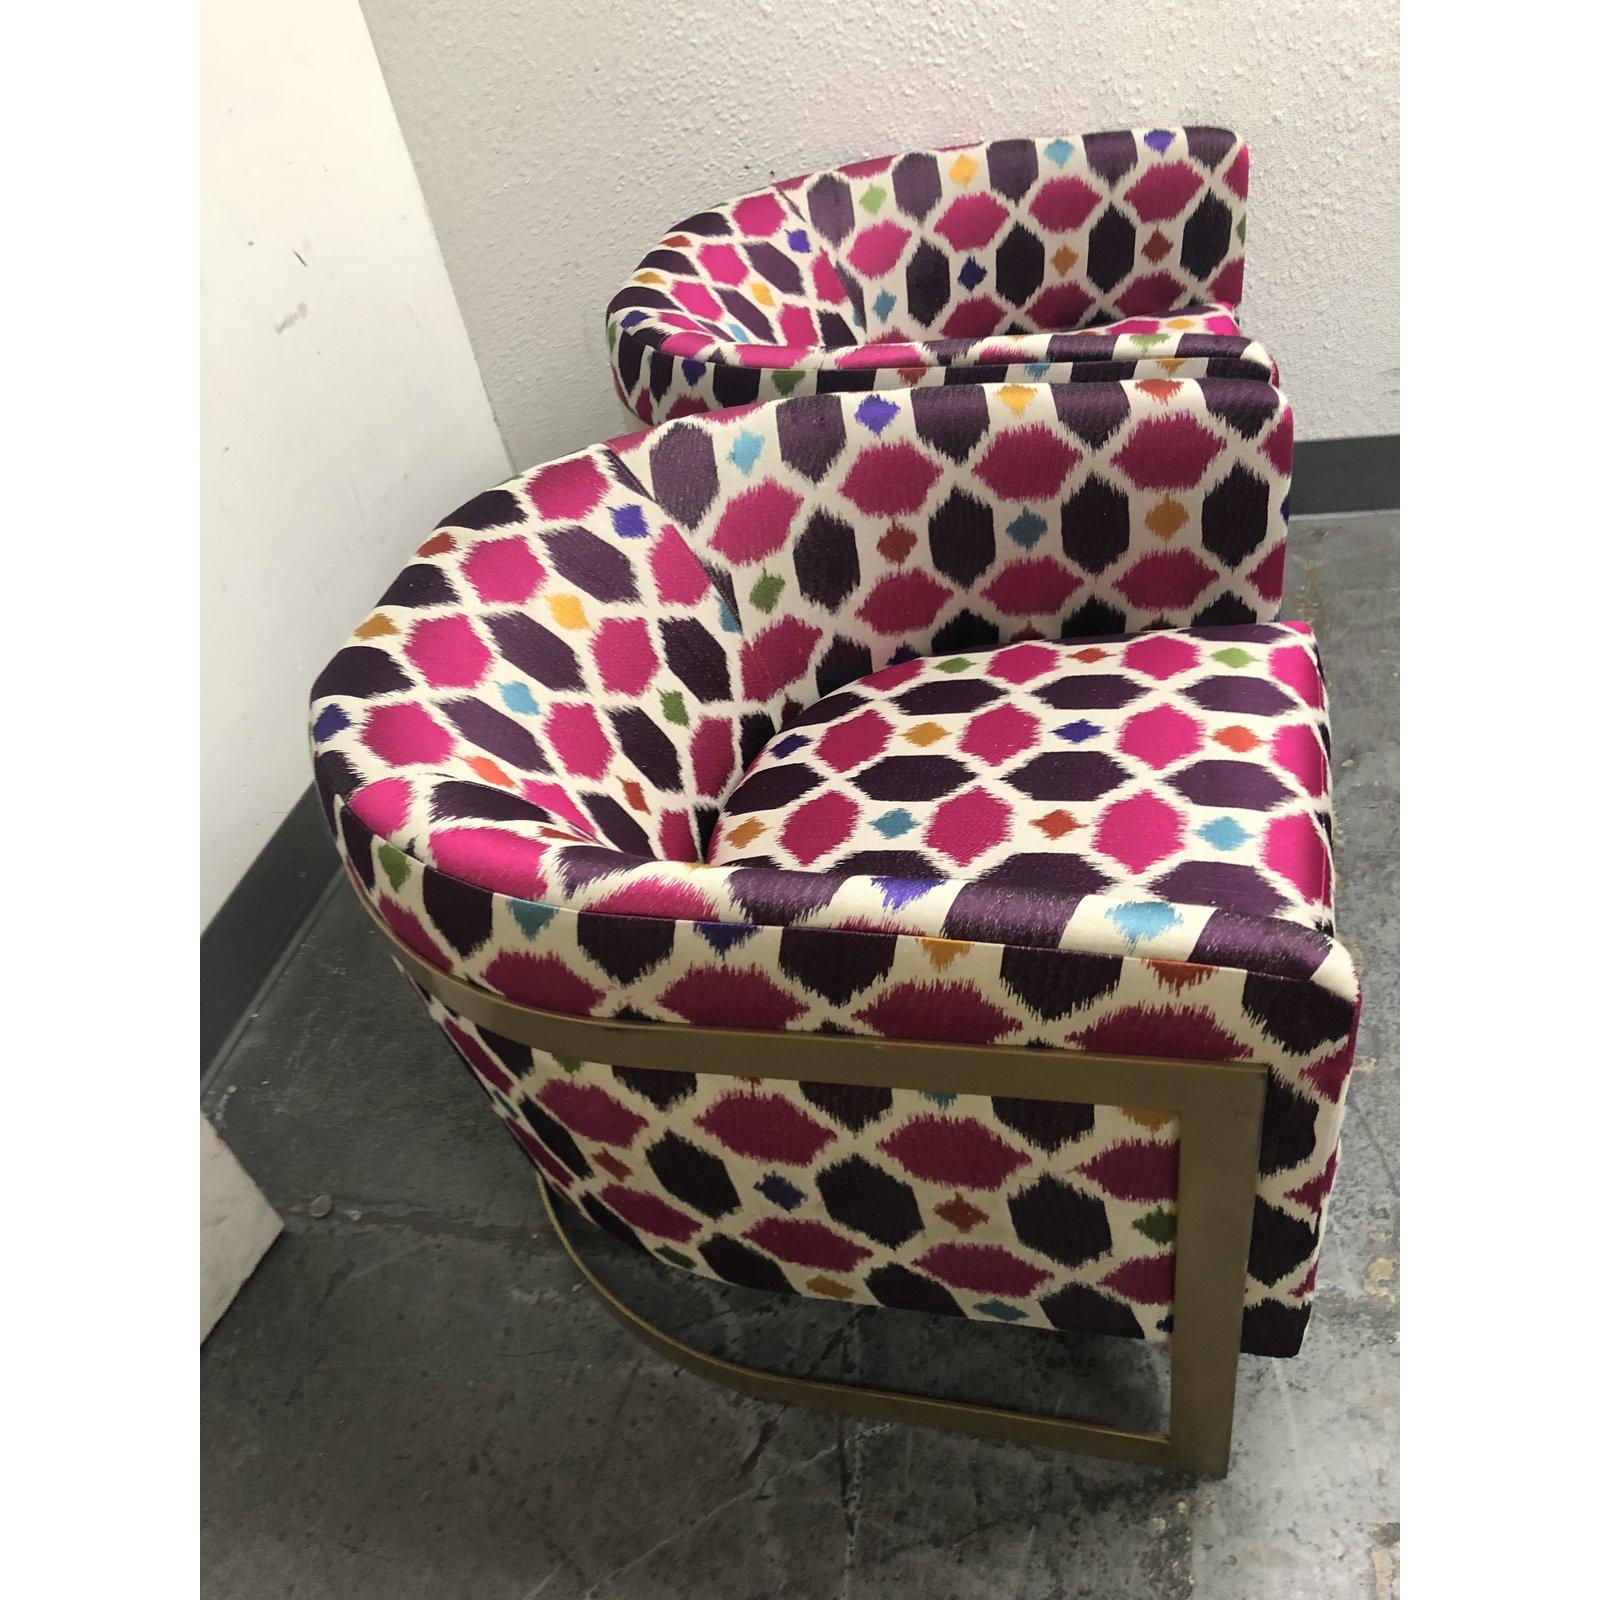 Pair of Nathan Anthony Korz Chair by Tina Nicole and Kravet Fabric im Zustand „Gut“ im Angebot in San Francisco, CA